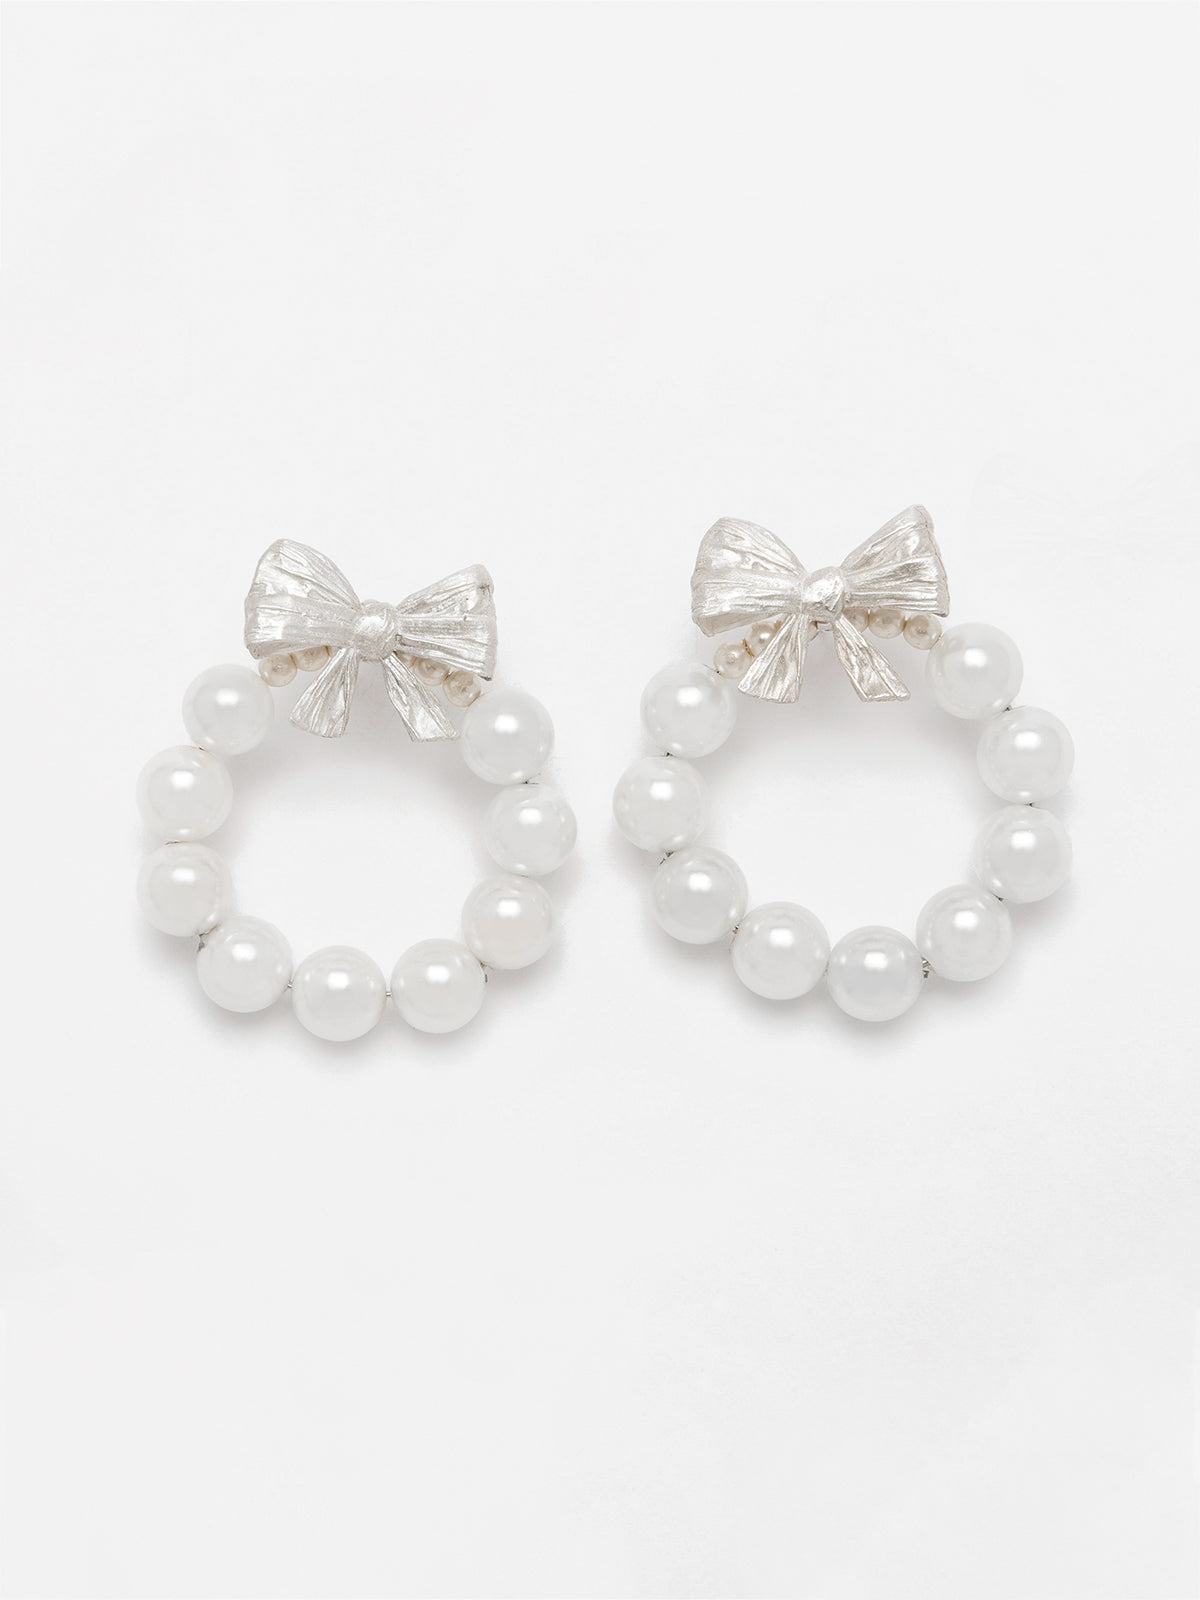 Bows and Pearls Hoops